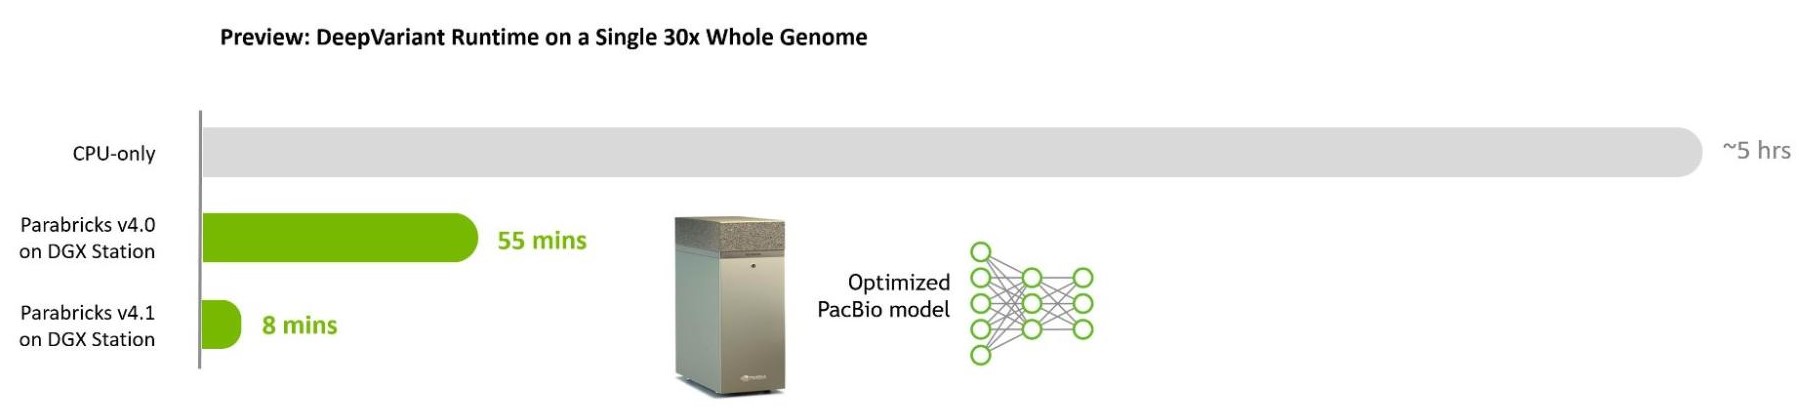 Chart showing benchmarks for DeepVariant runtime on a single 30x whole genome, which is now 8 minutes with Parabricks 4.1 on DGX Station.